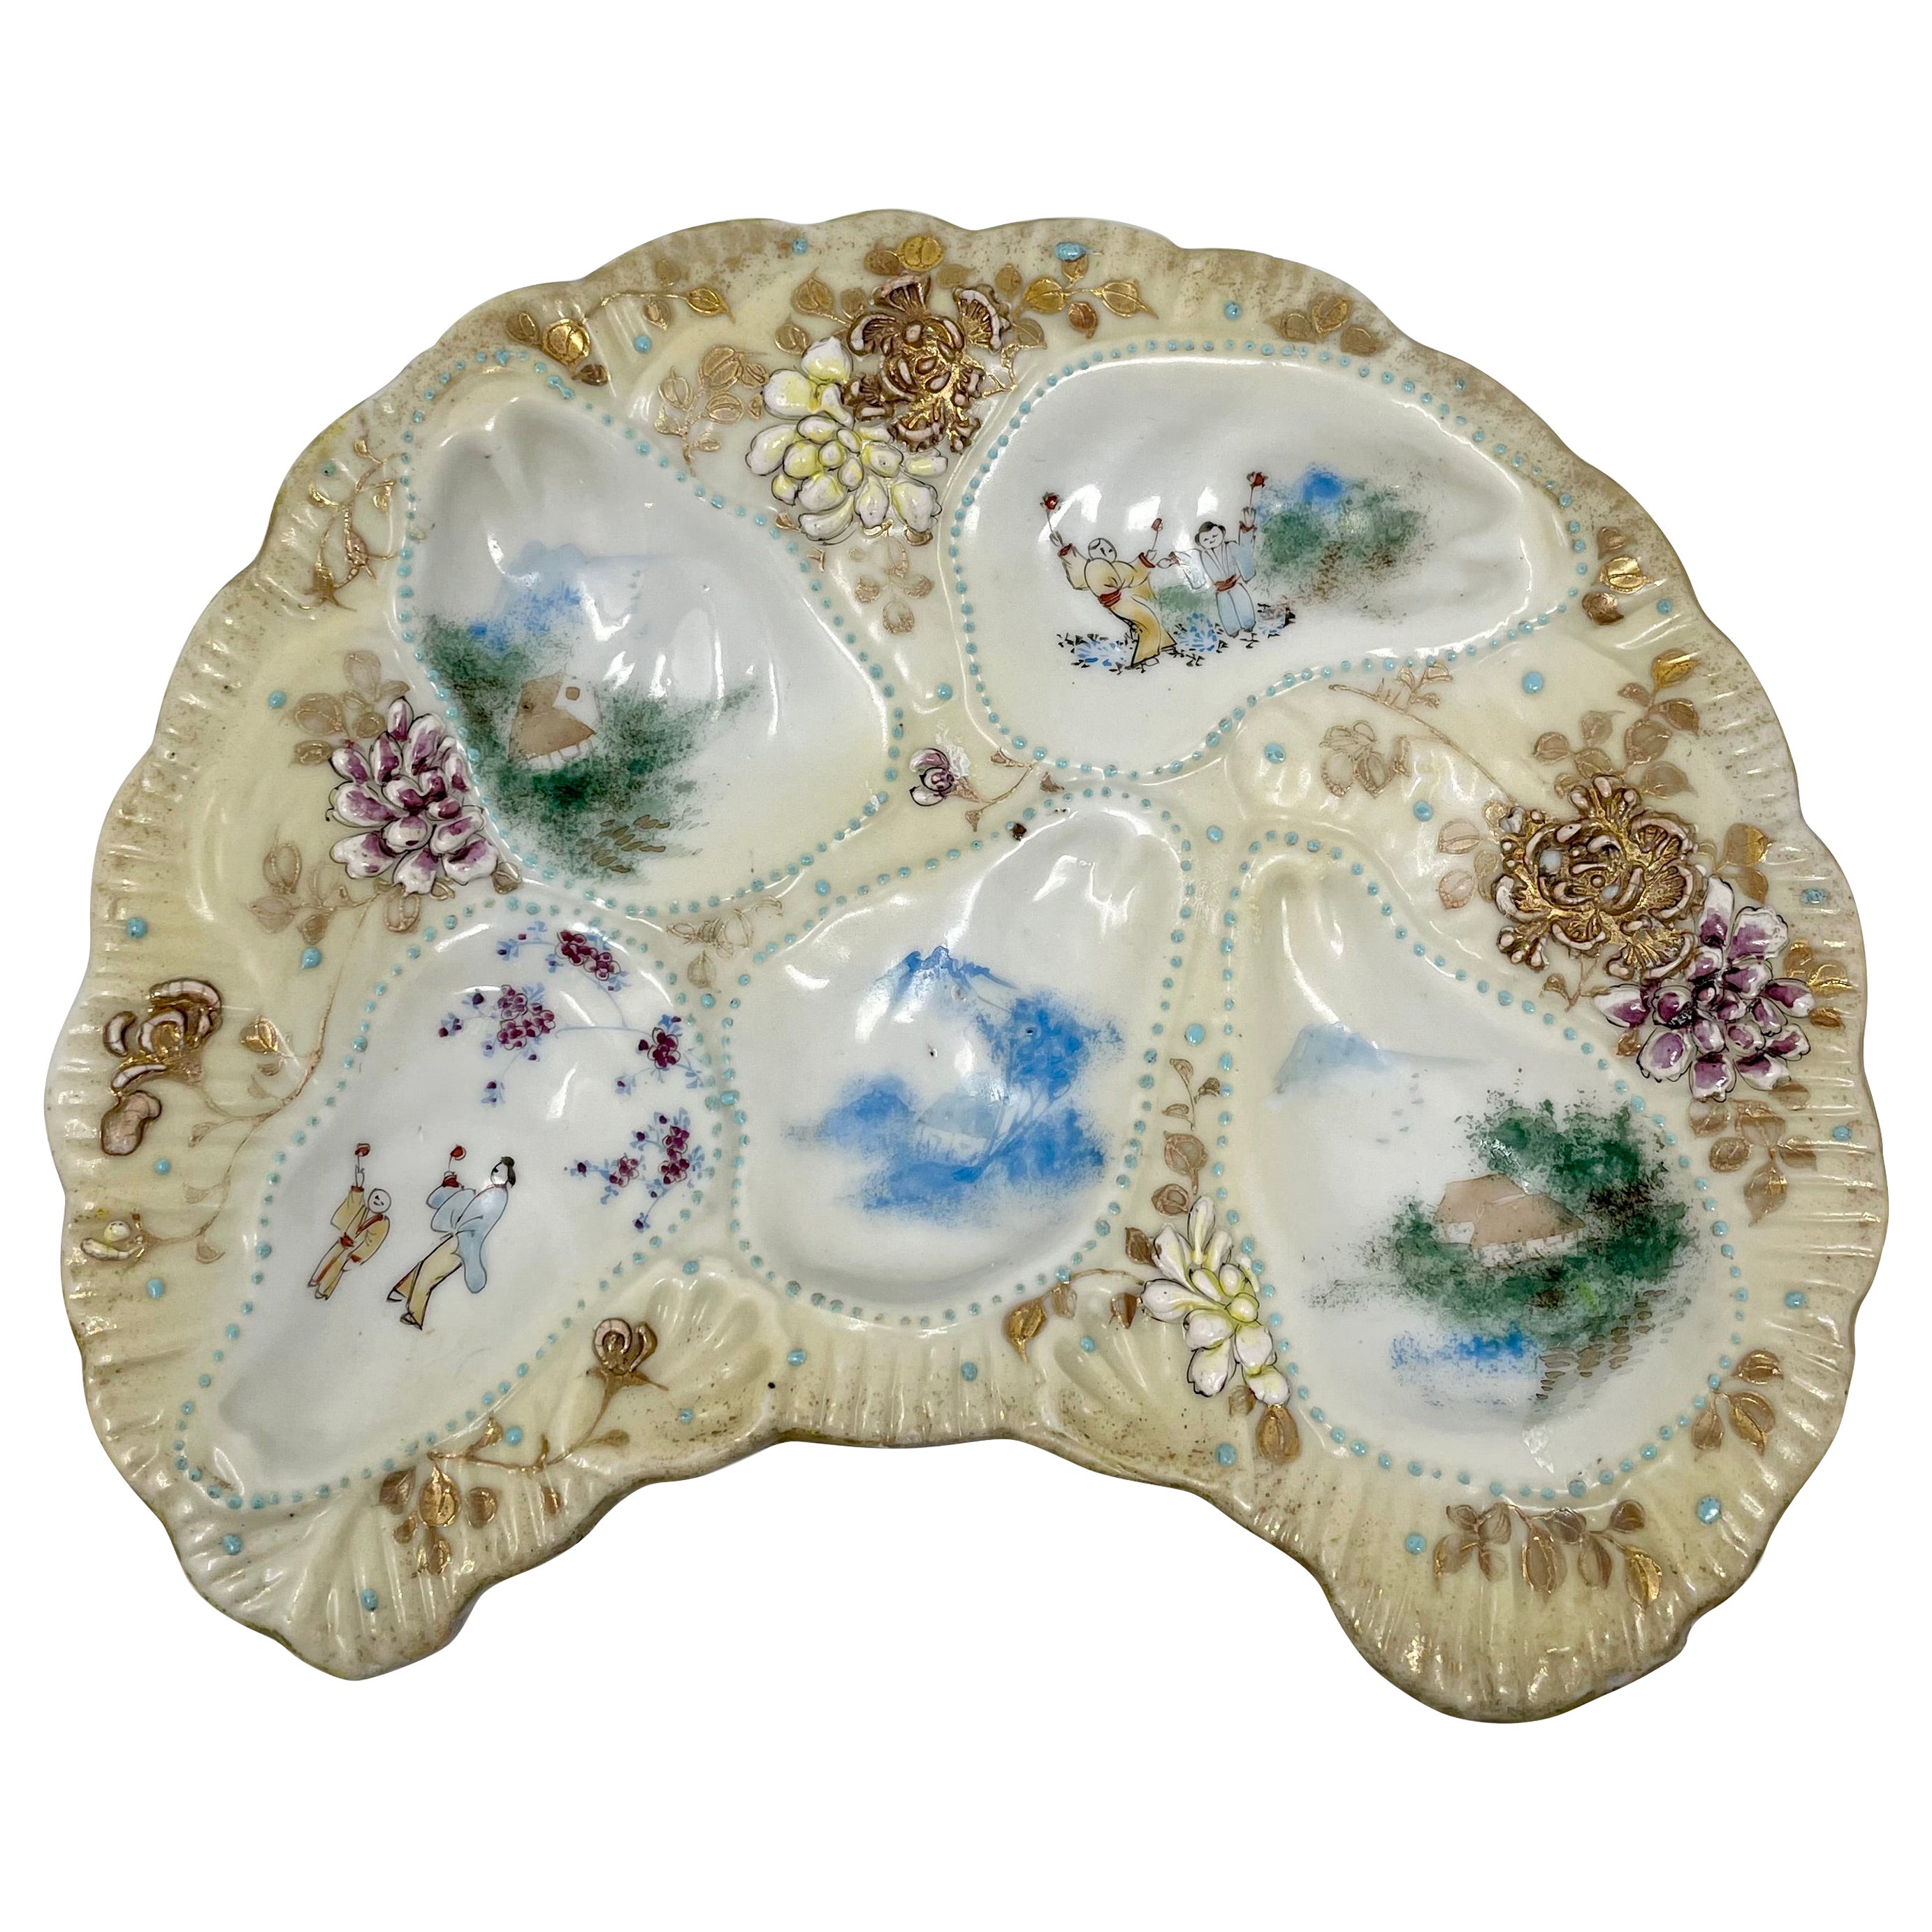 Antique Japanese Kutani Porcelain Crescent-Shaped Jeweled Oyster Plate, Ca. 1890 For Sale